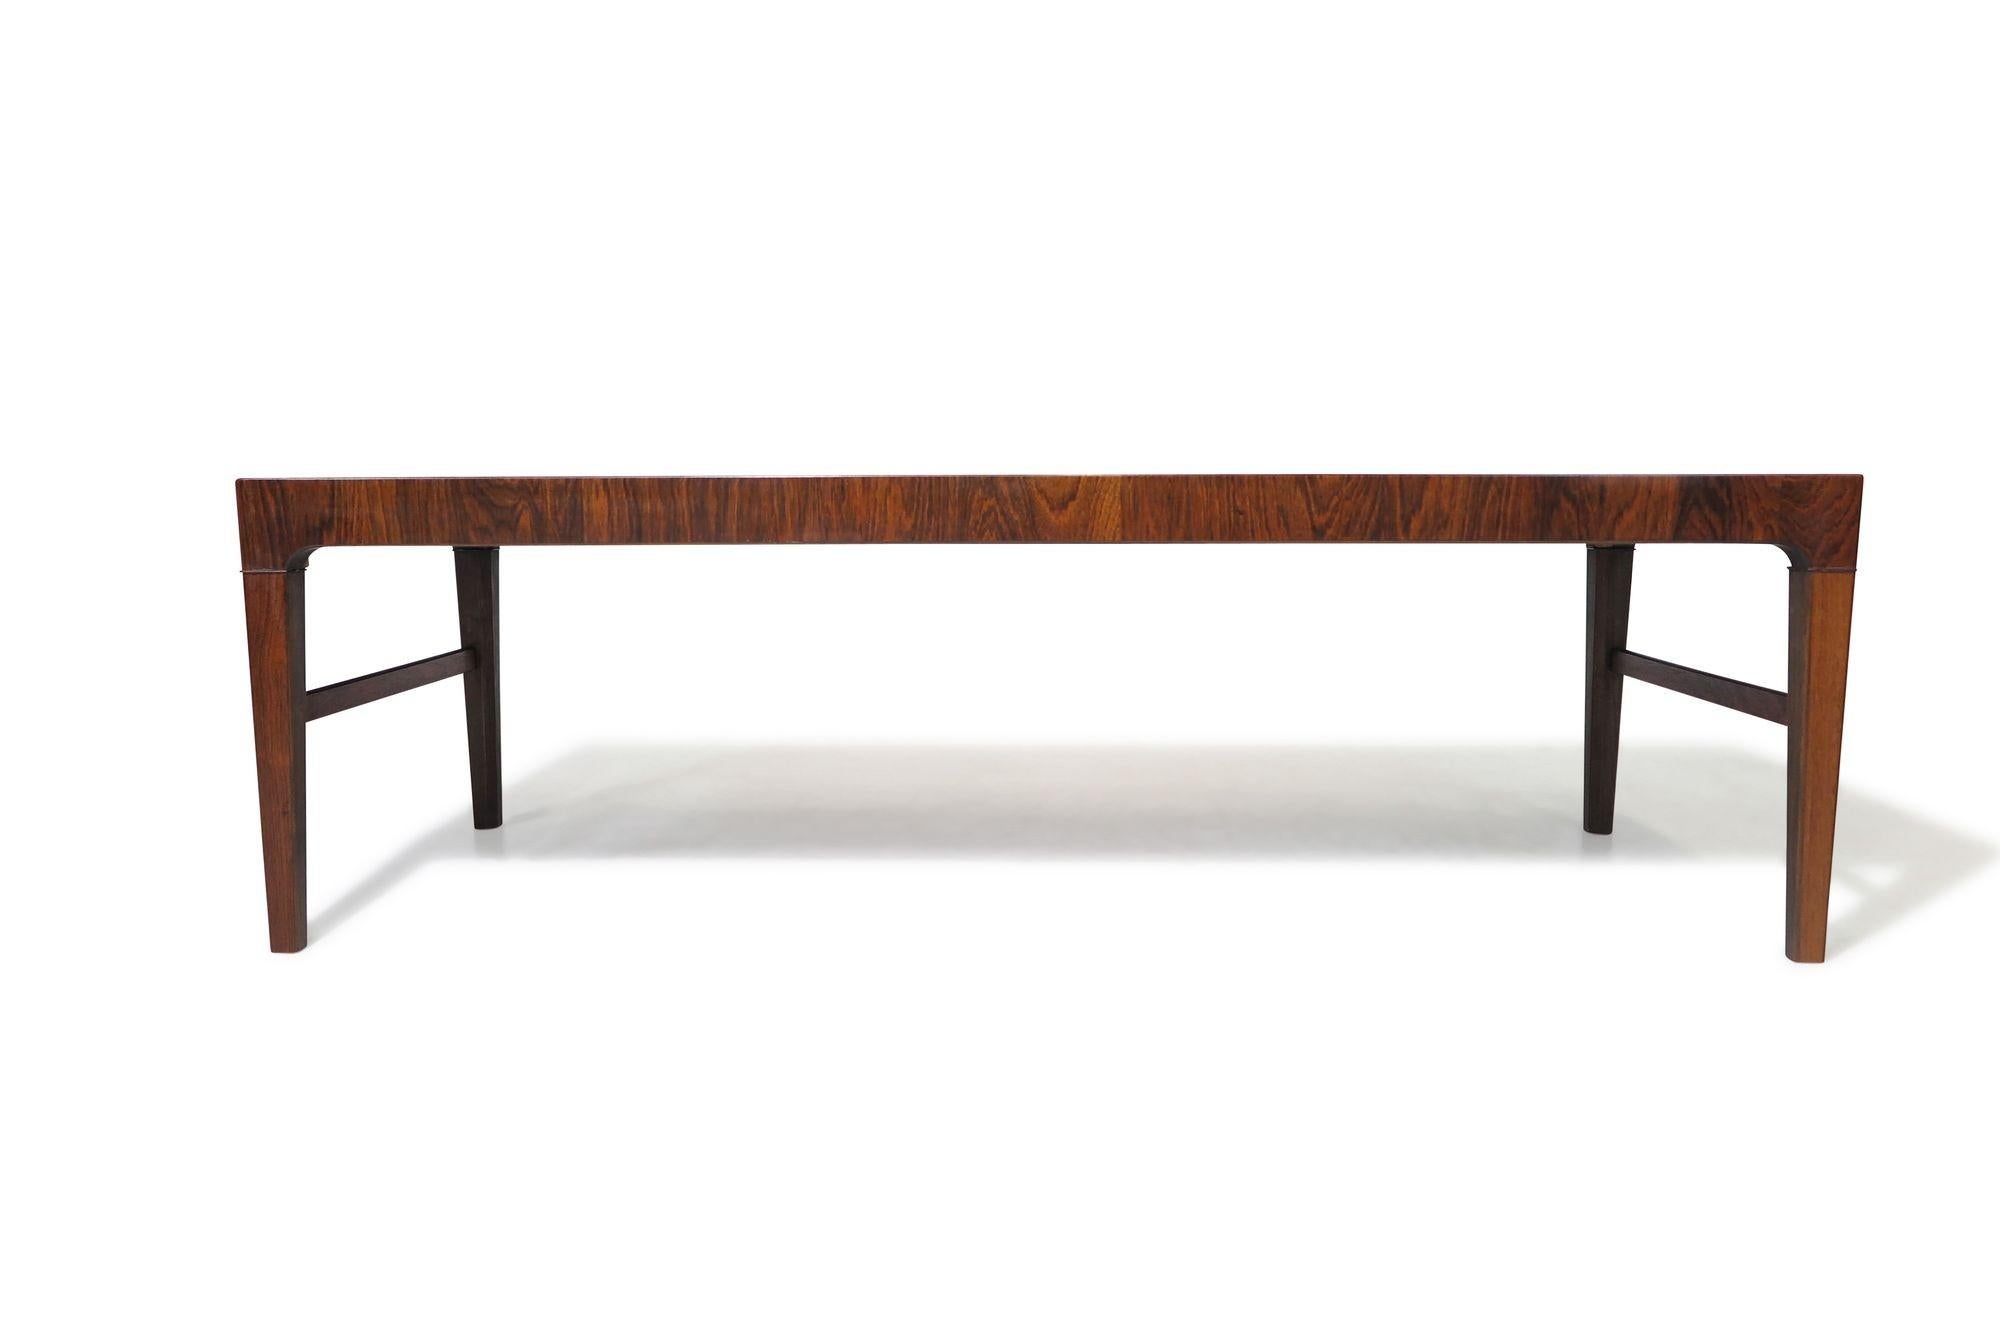 Elegant 1950's rosewood coffee table with stunning book-matched grain, in a rectangular form with tapered legs and cross stretchers, in the manner of master cabinetmaker Frits Henningsen.
Measurements
W 59'' x D 20,25'' x H 18''